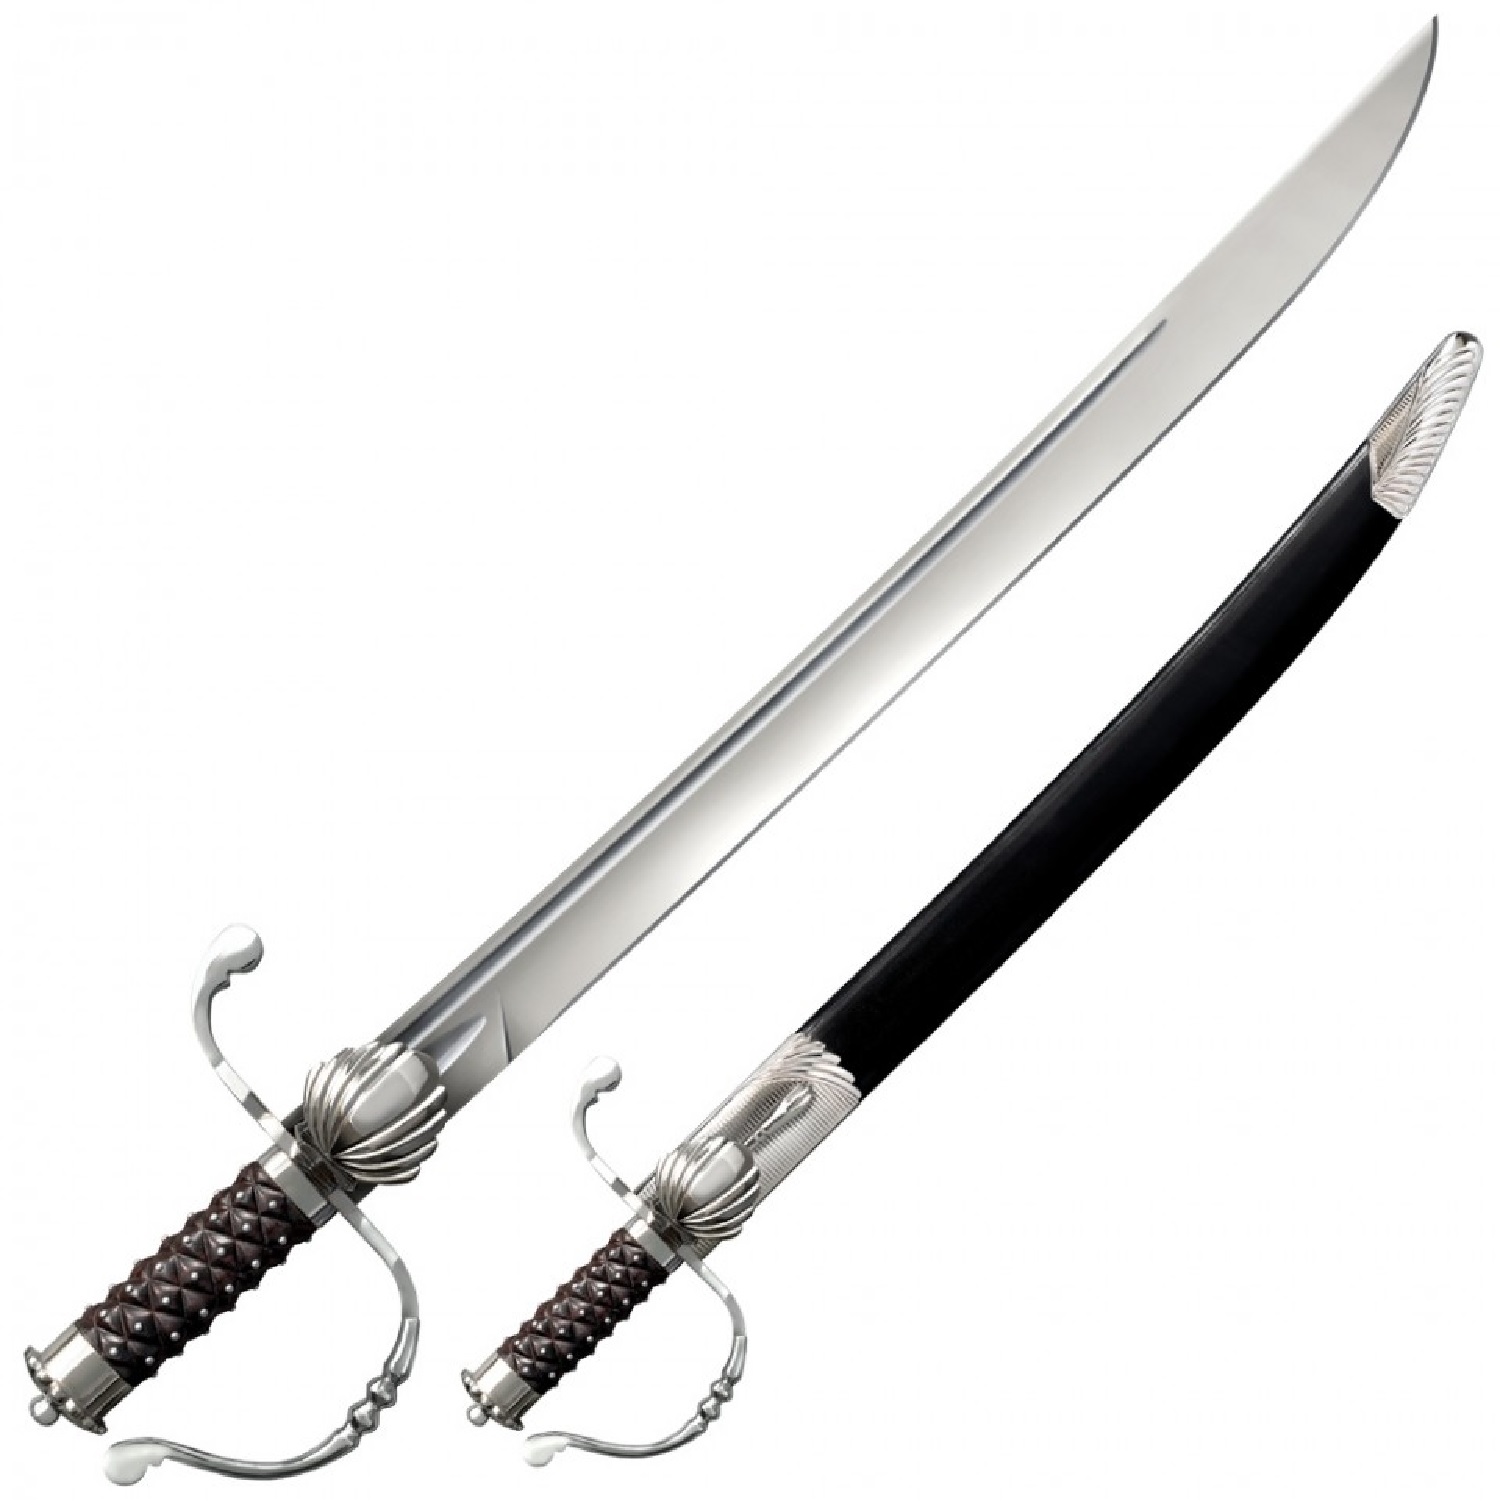 Cold Steel CLD-88CLQ 2019 5.25 in. Hunting Sword Sword with 1055 Carbon Steel Blade & Rosewood Handles